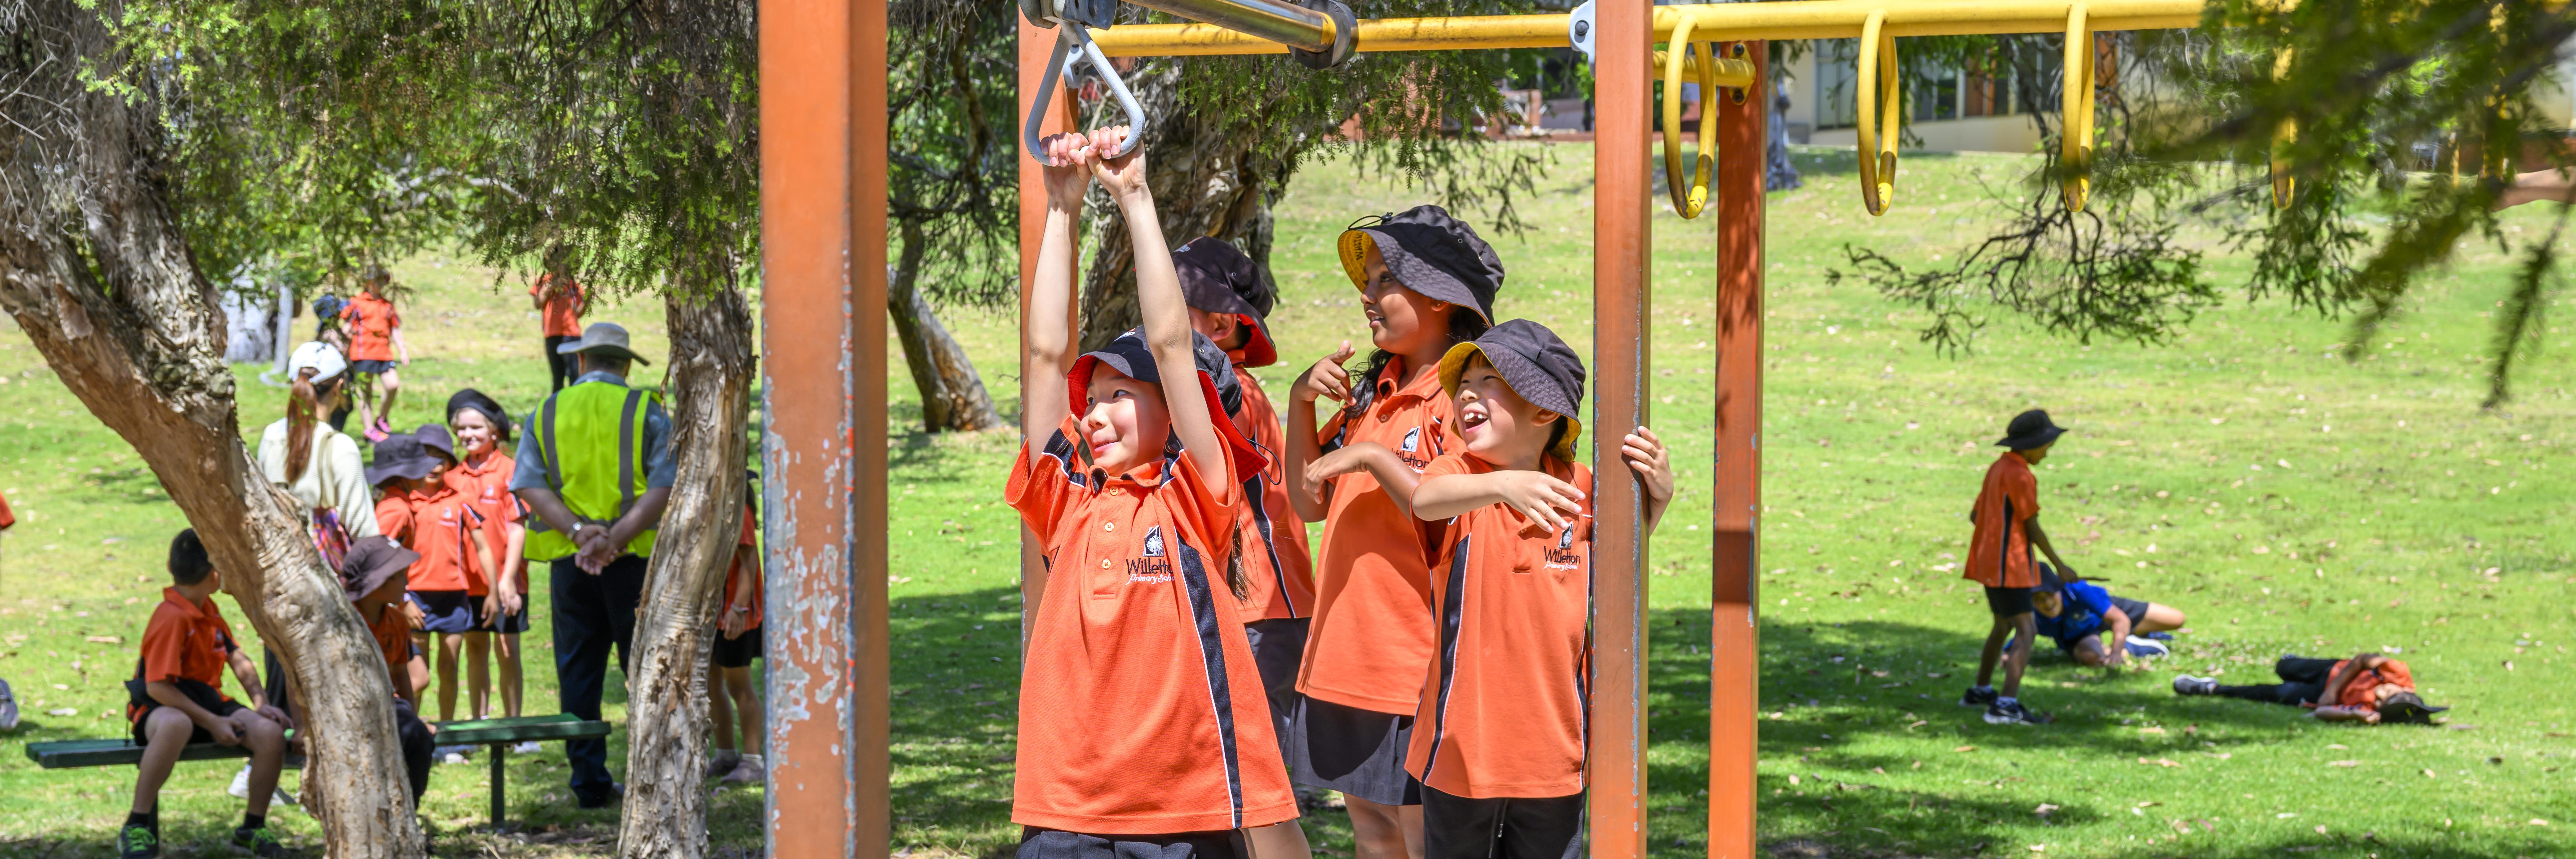 children out in the playground in background of image. front of image is a girl riding on a flying fox, looking left of camera as she holds onto the handles above her. children waiting in line behind her are smiling and laughing, watching her cross the flying fox.